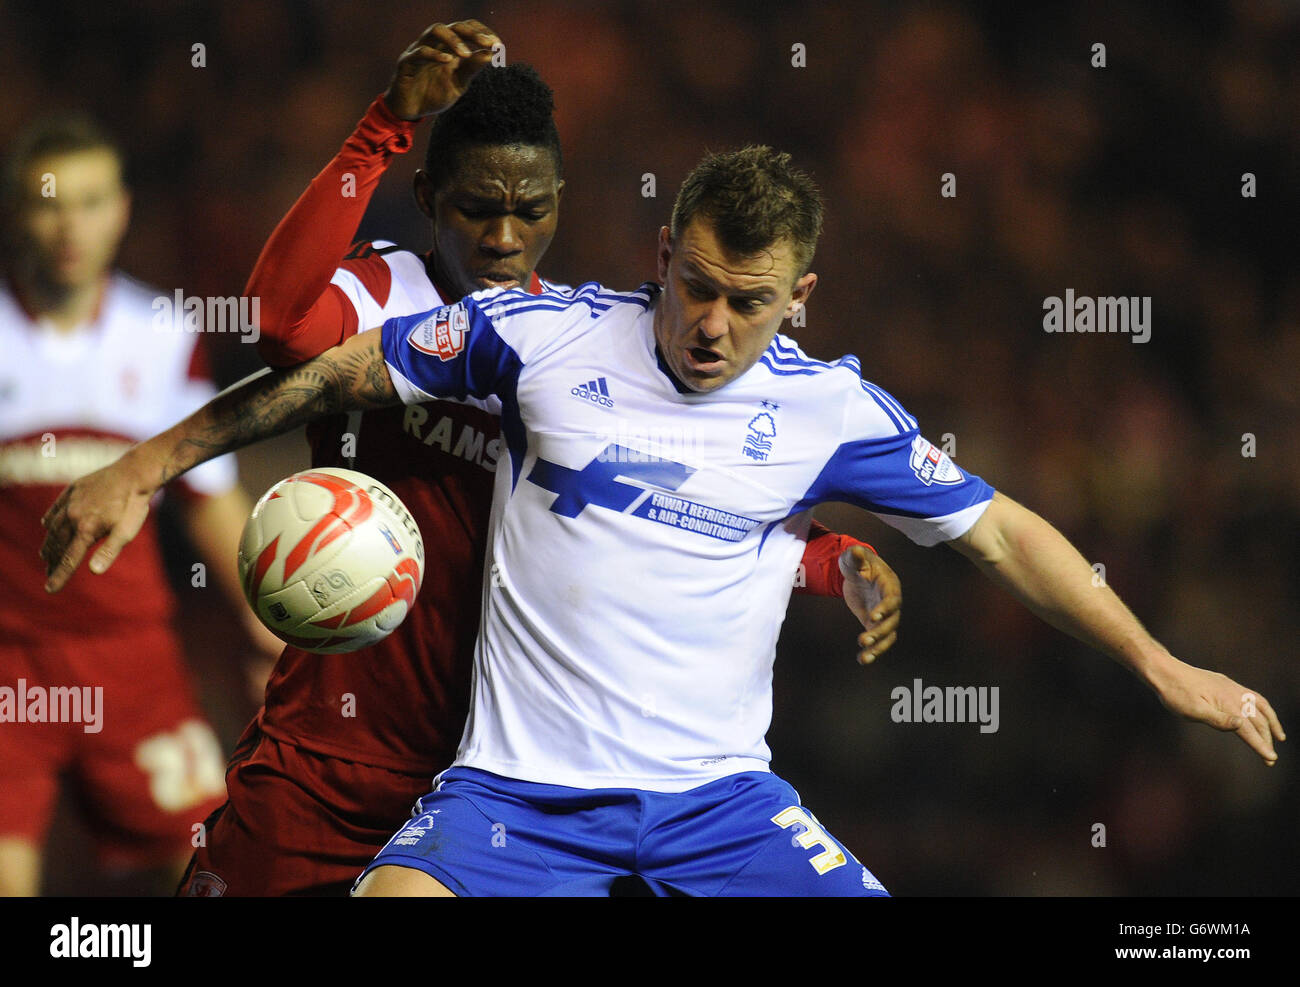 Middlesbrough's Kenneth Omeruo and Nottingham Forest's Simon Cox battle for the ball during the Sky Bet Championship match at the Riverside Stadium, Middlesbrough. Stock Photo